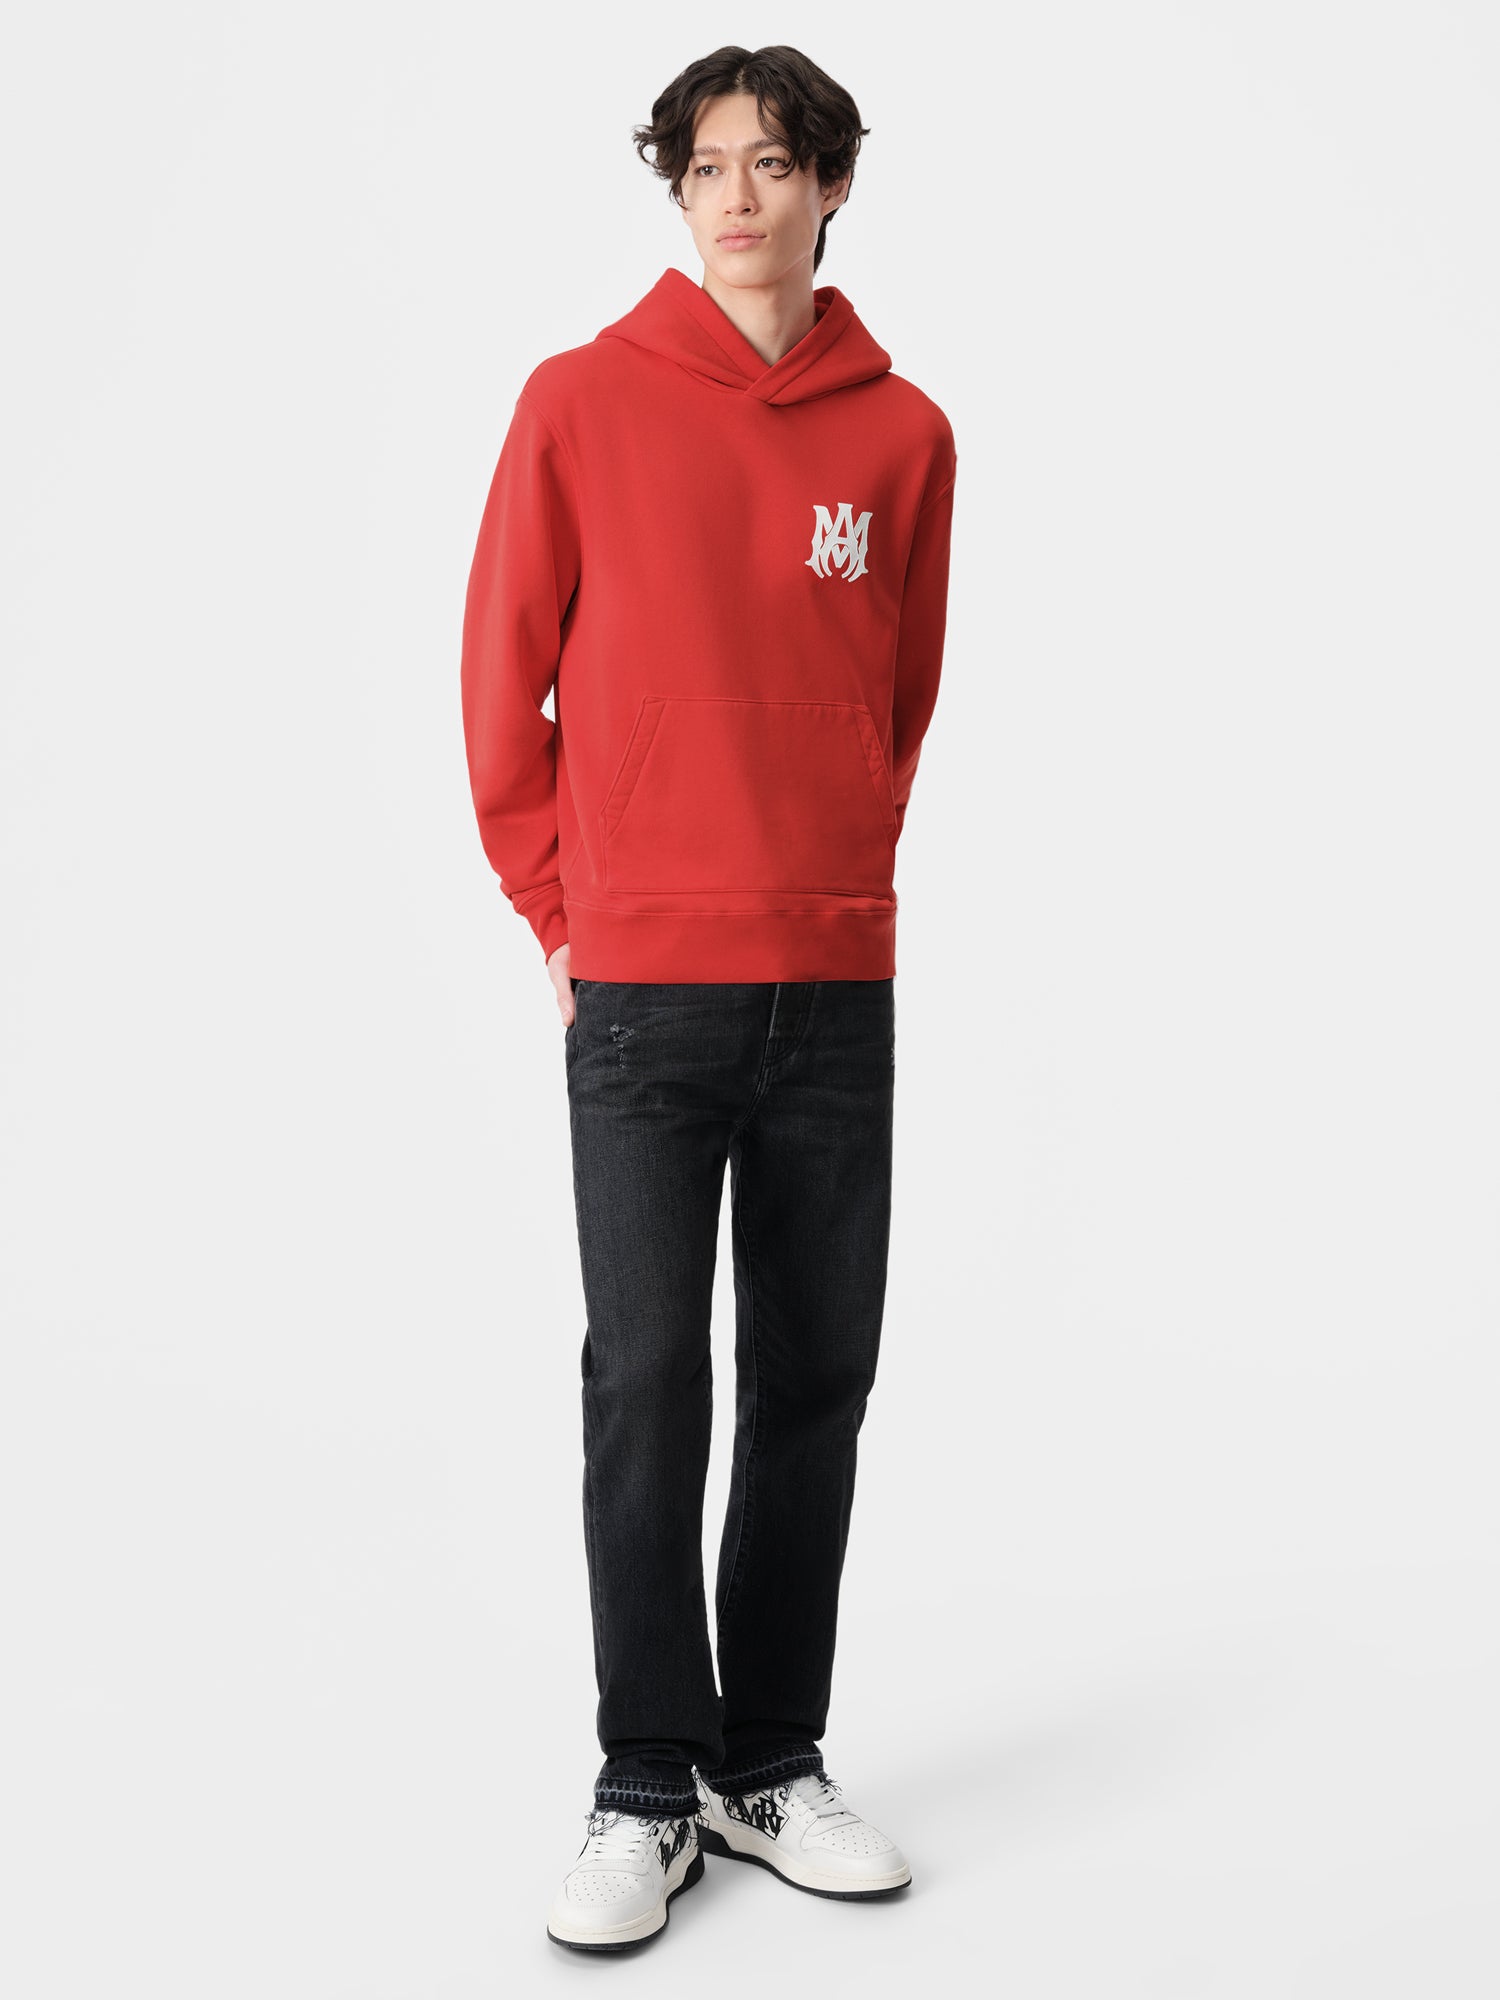 Product MA CORE LOGO HOODIE - Red featured image